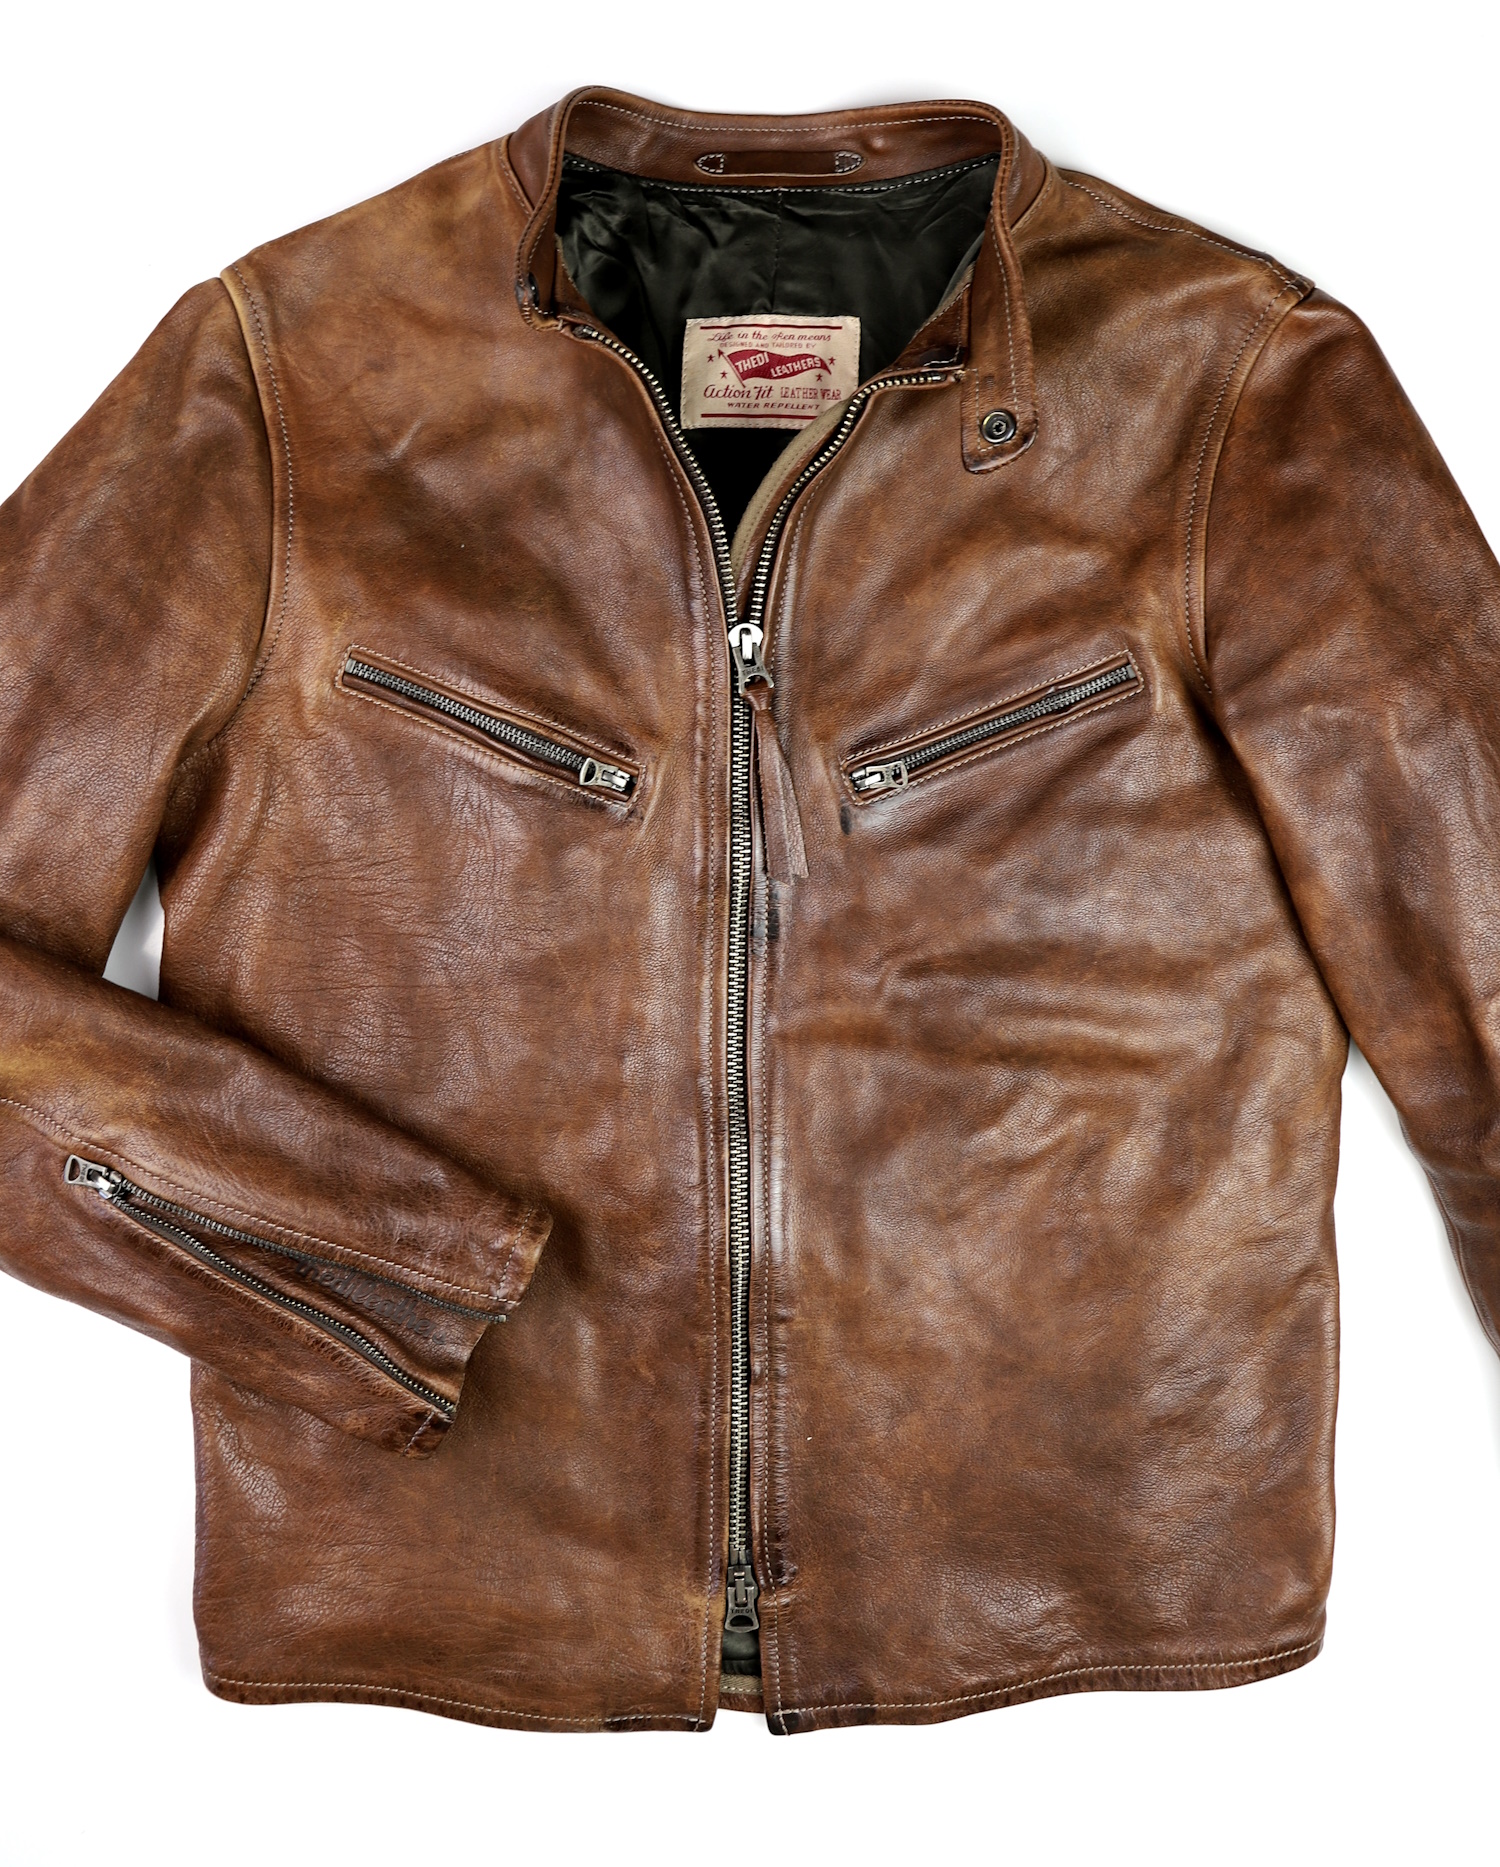 Thedi Cafe Racer Light Brown Toscano Buffalo front.jpg